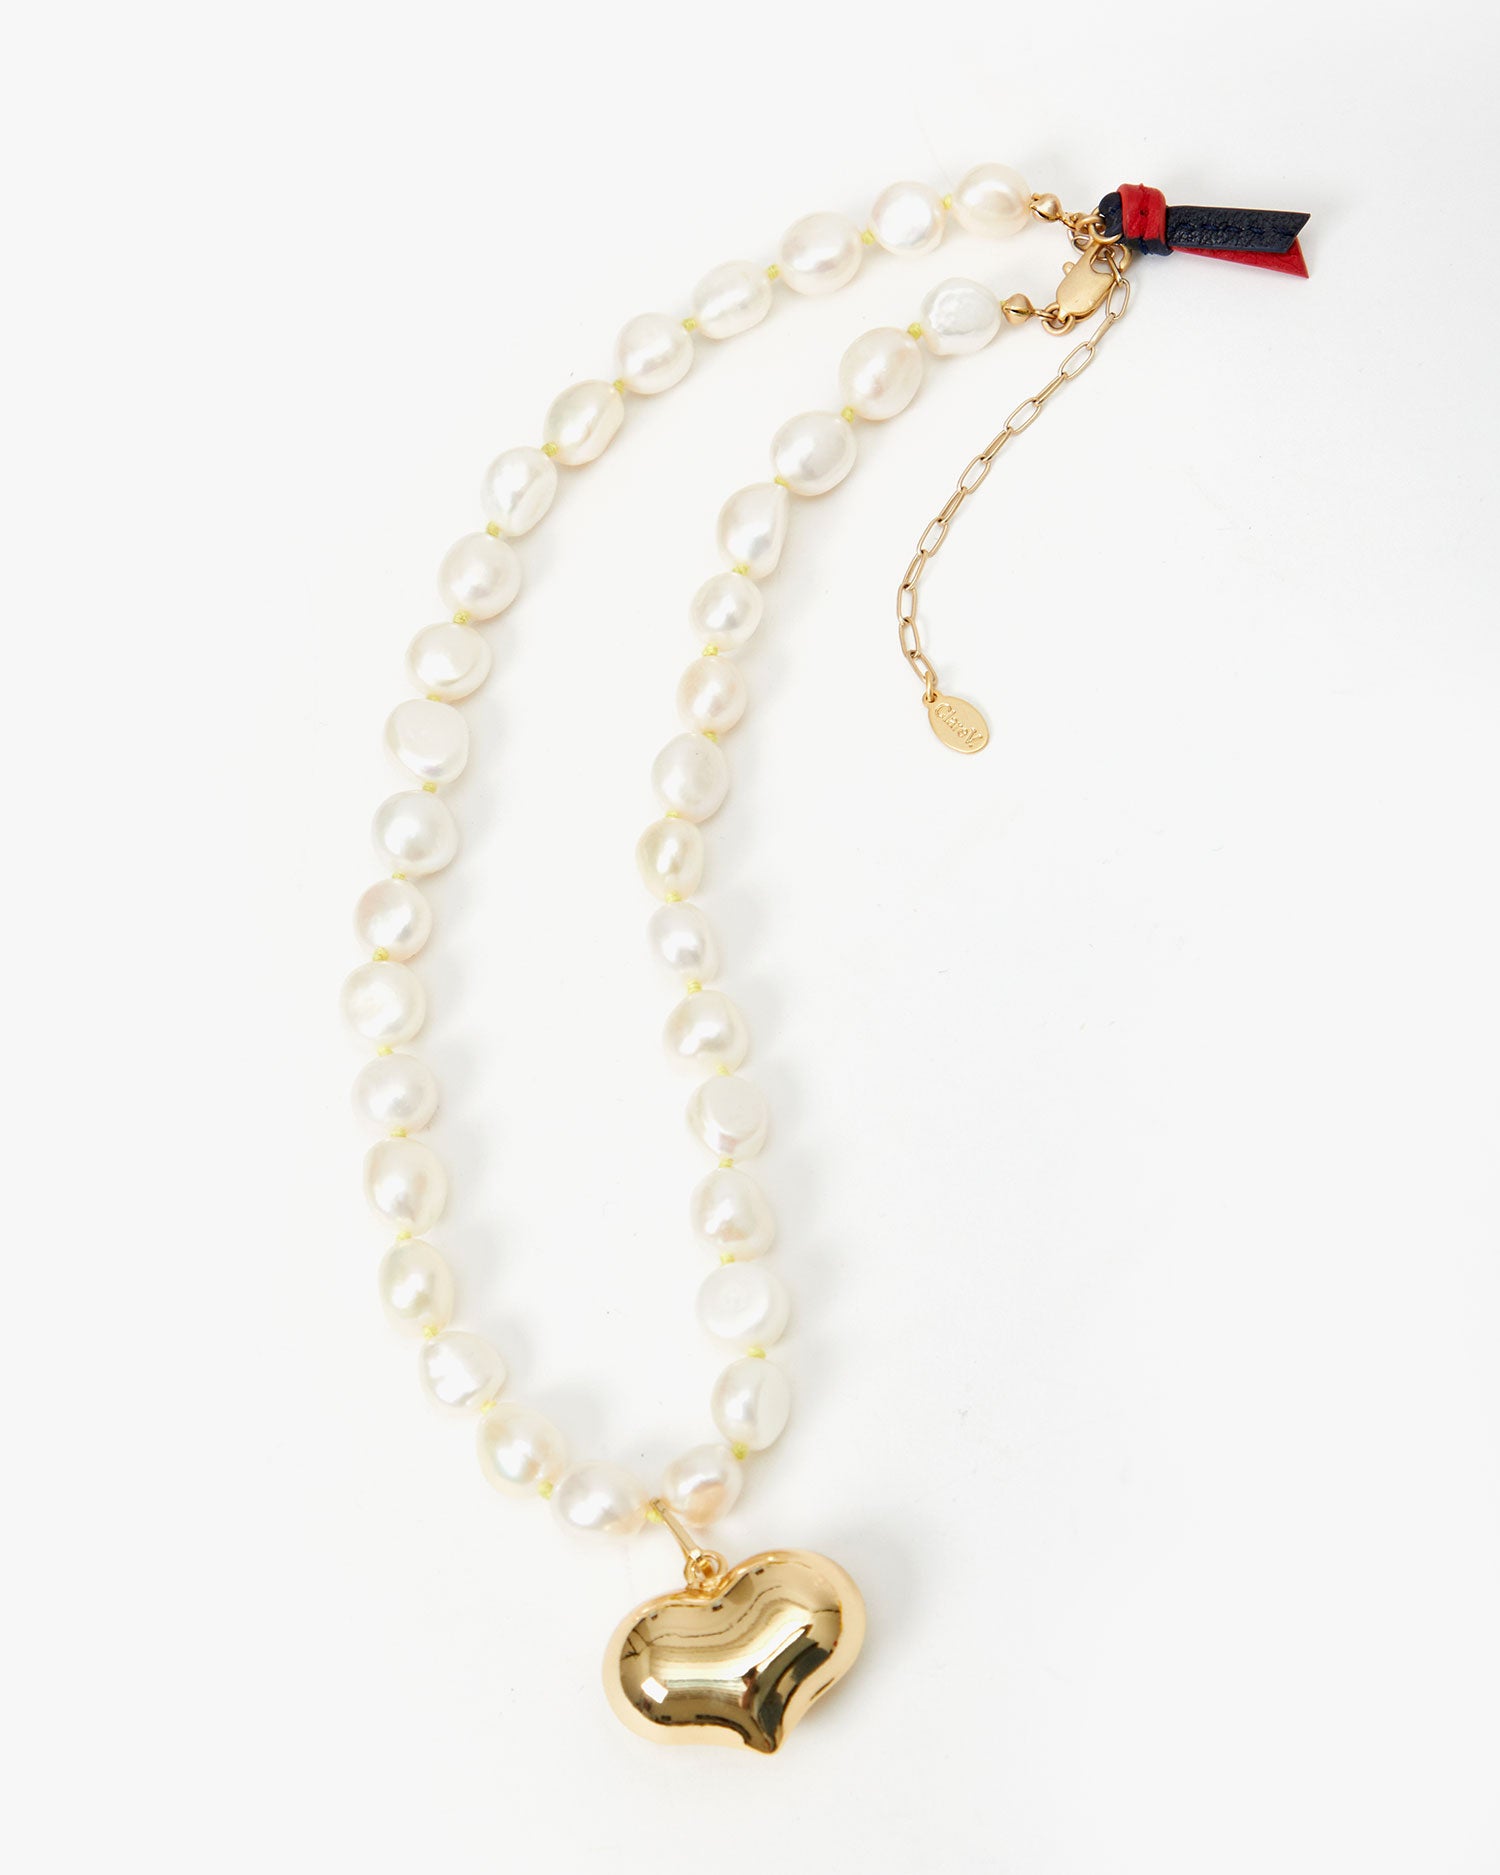 Mylar Heart Charm paired with our Freshwater Pearl Necklace.